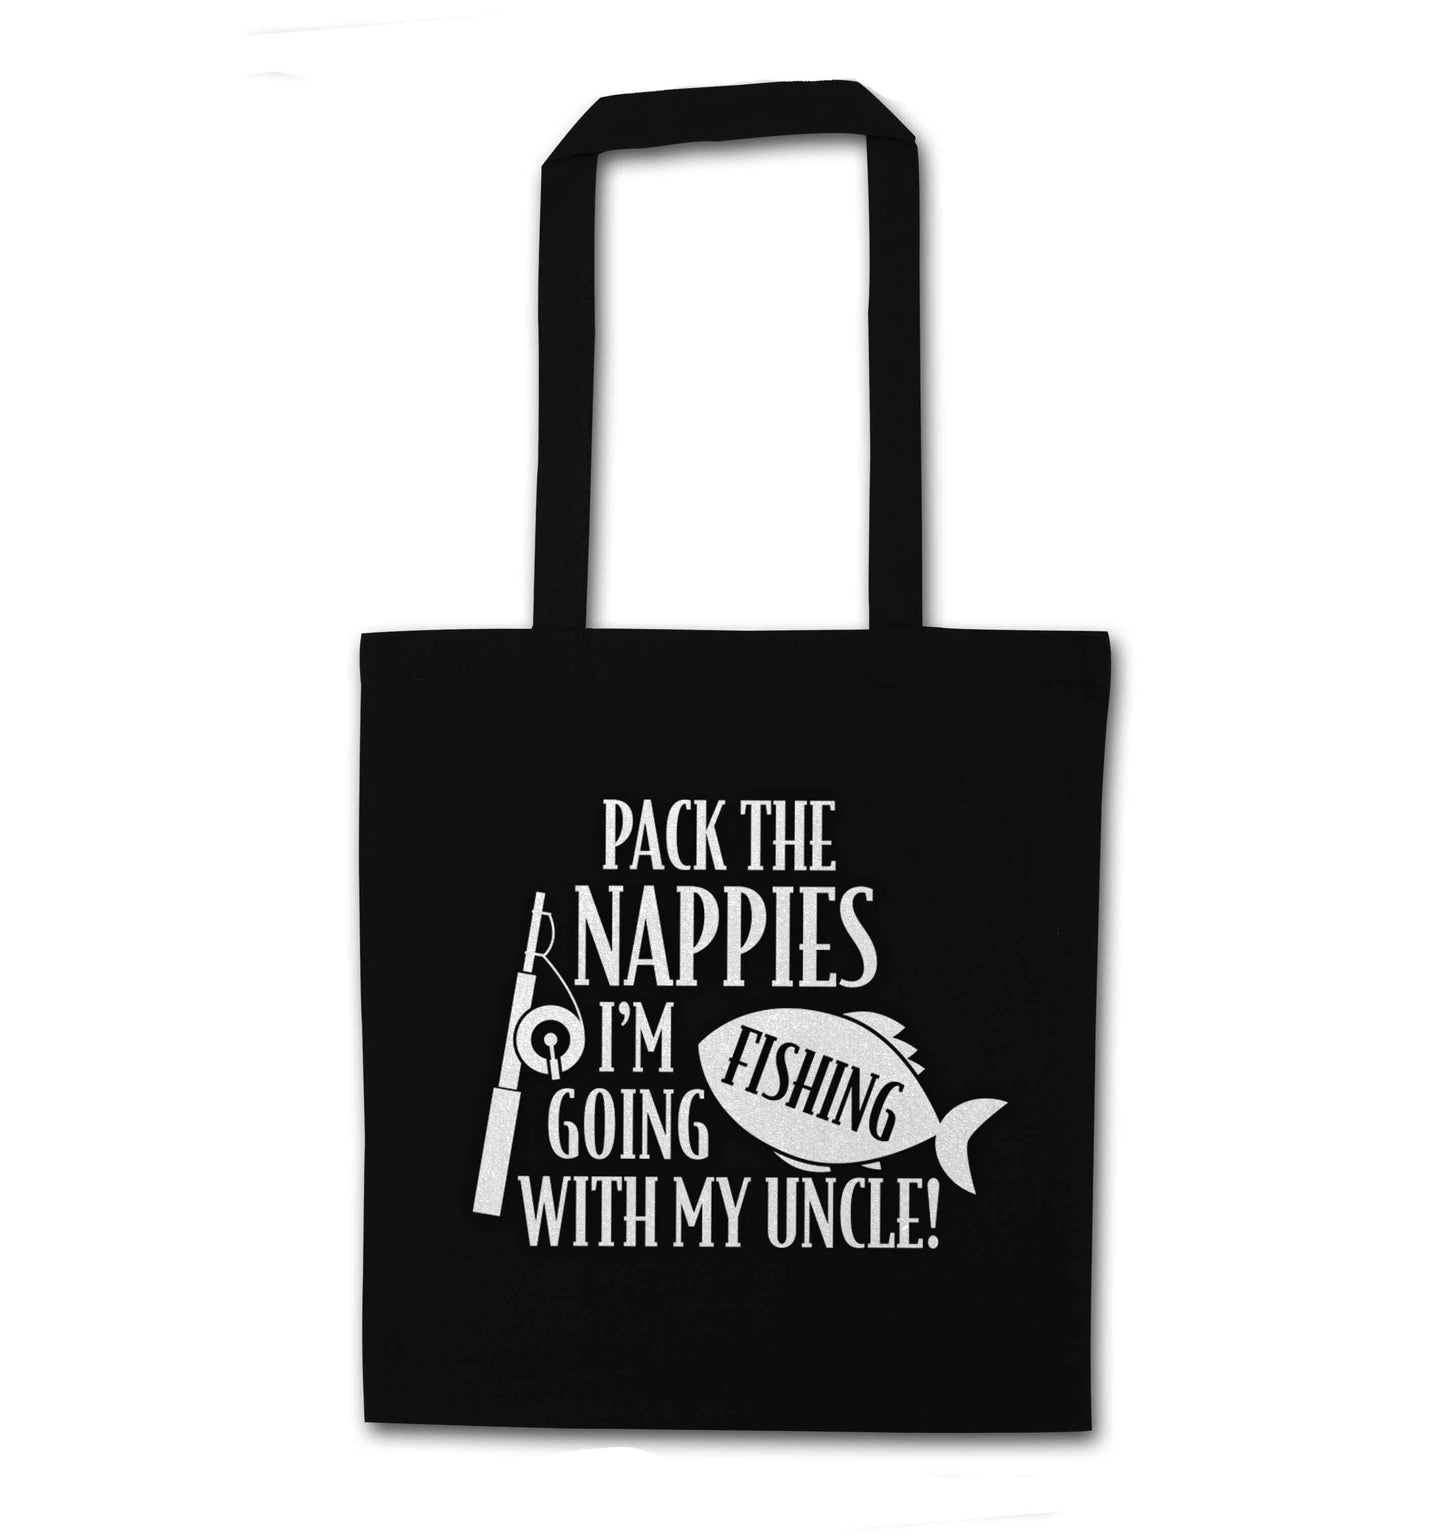 Pack the nappies I'm going fishing my Uncle black tote bag